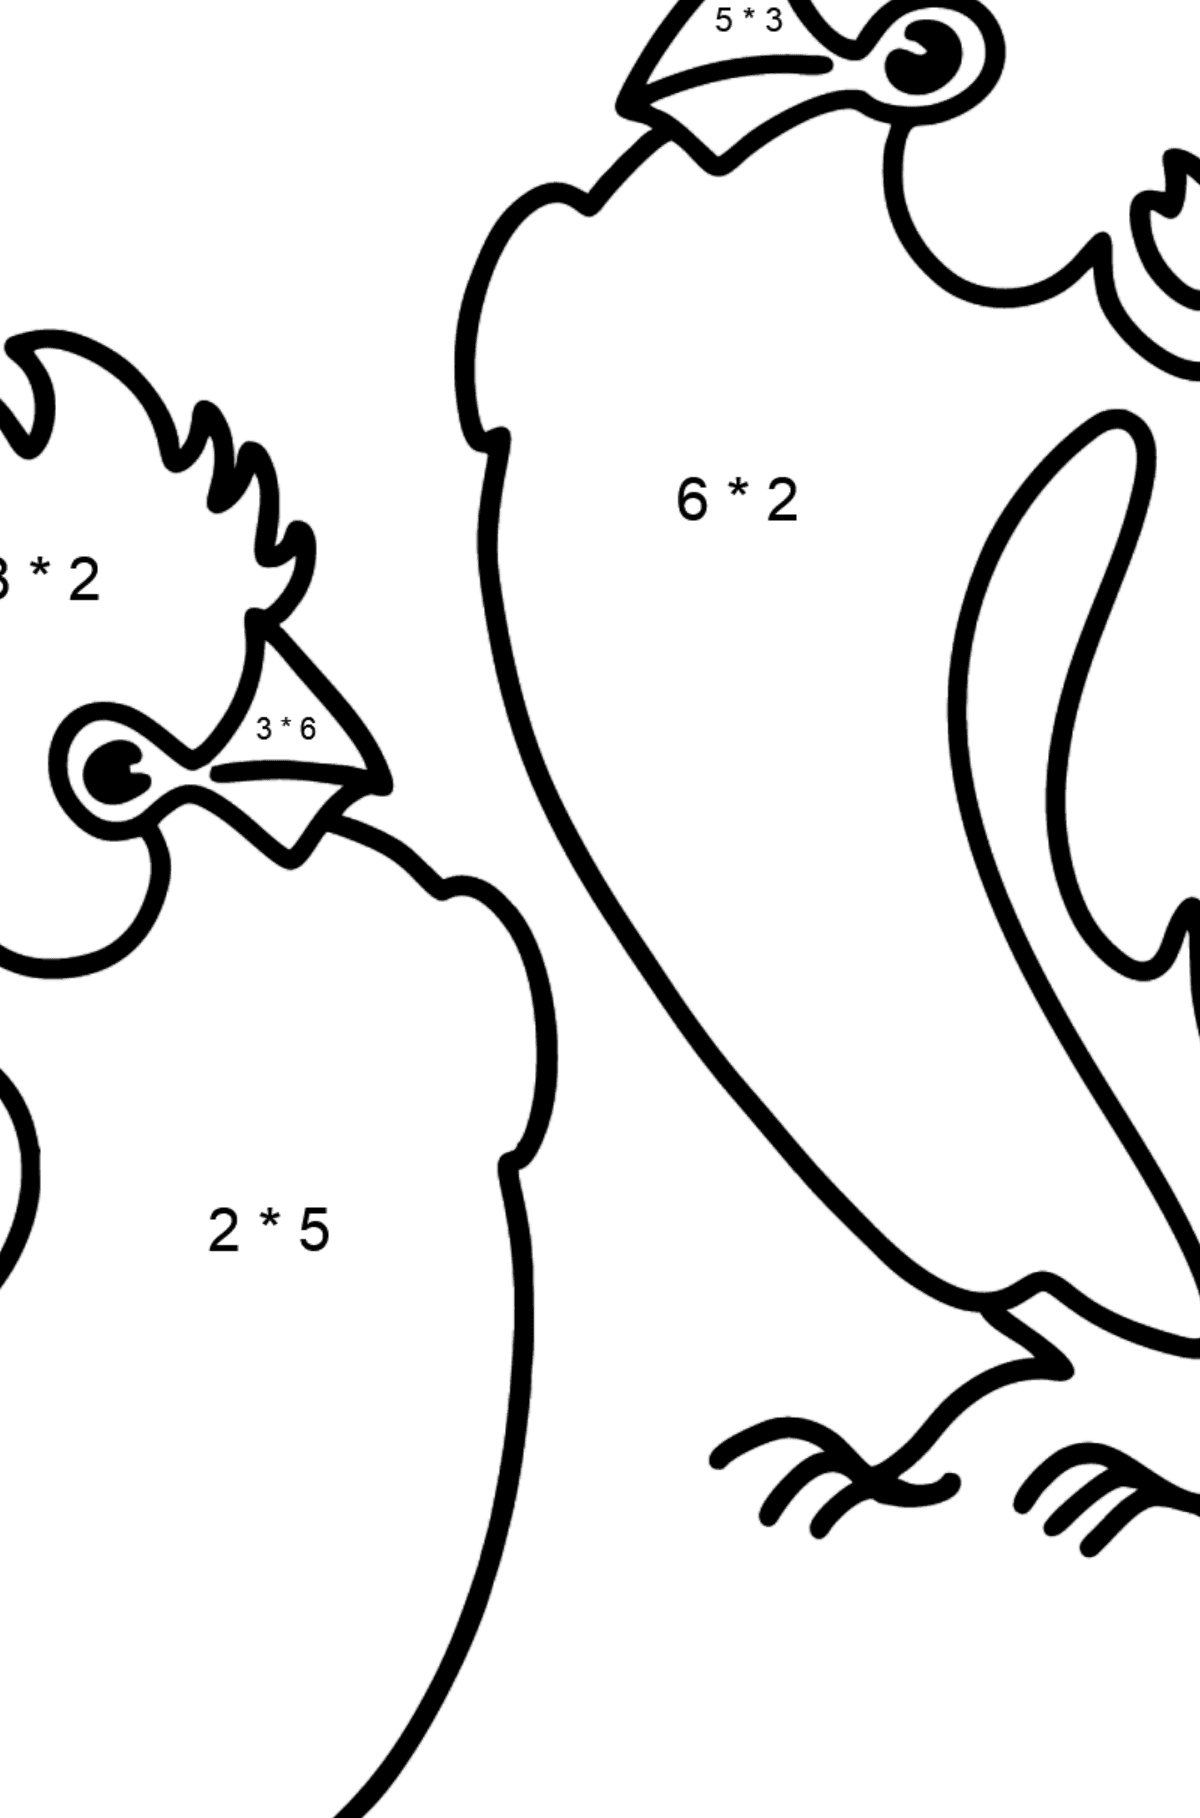 2 Parrots coloring page - Math Coloring - Multiplication for Kids